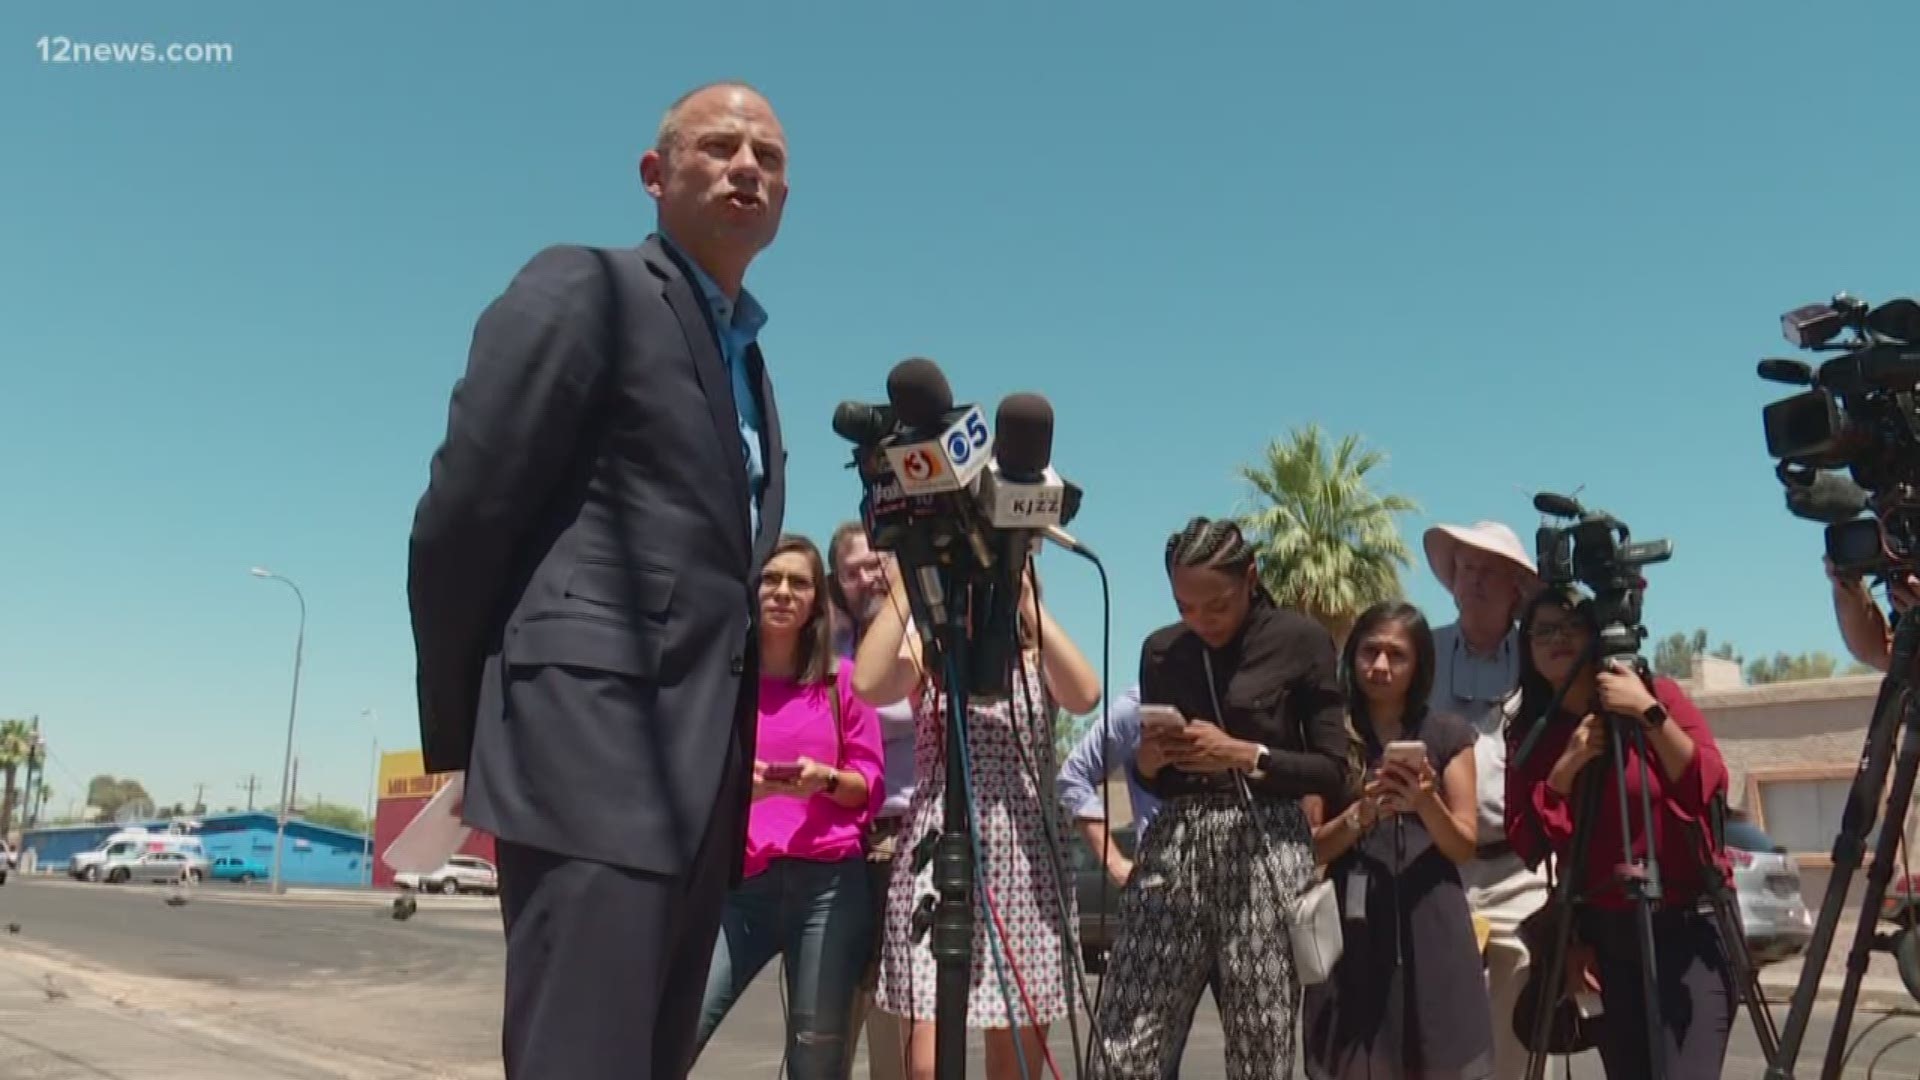 Michael Avenatti was in Phoenix today to meet with a migrant boy who was separated from his mother at the border. He is now representing 60 children separated from their families.